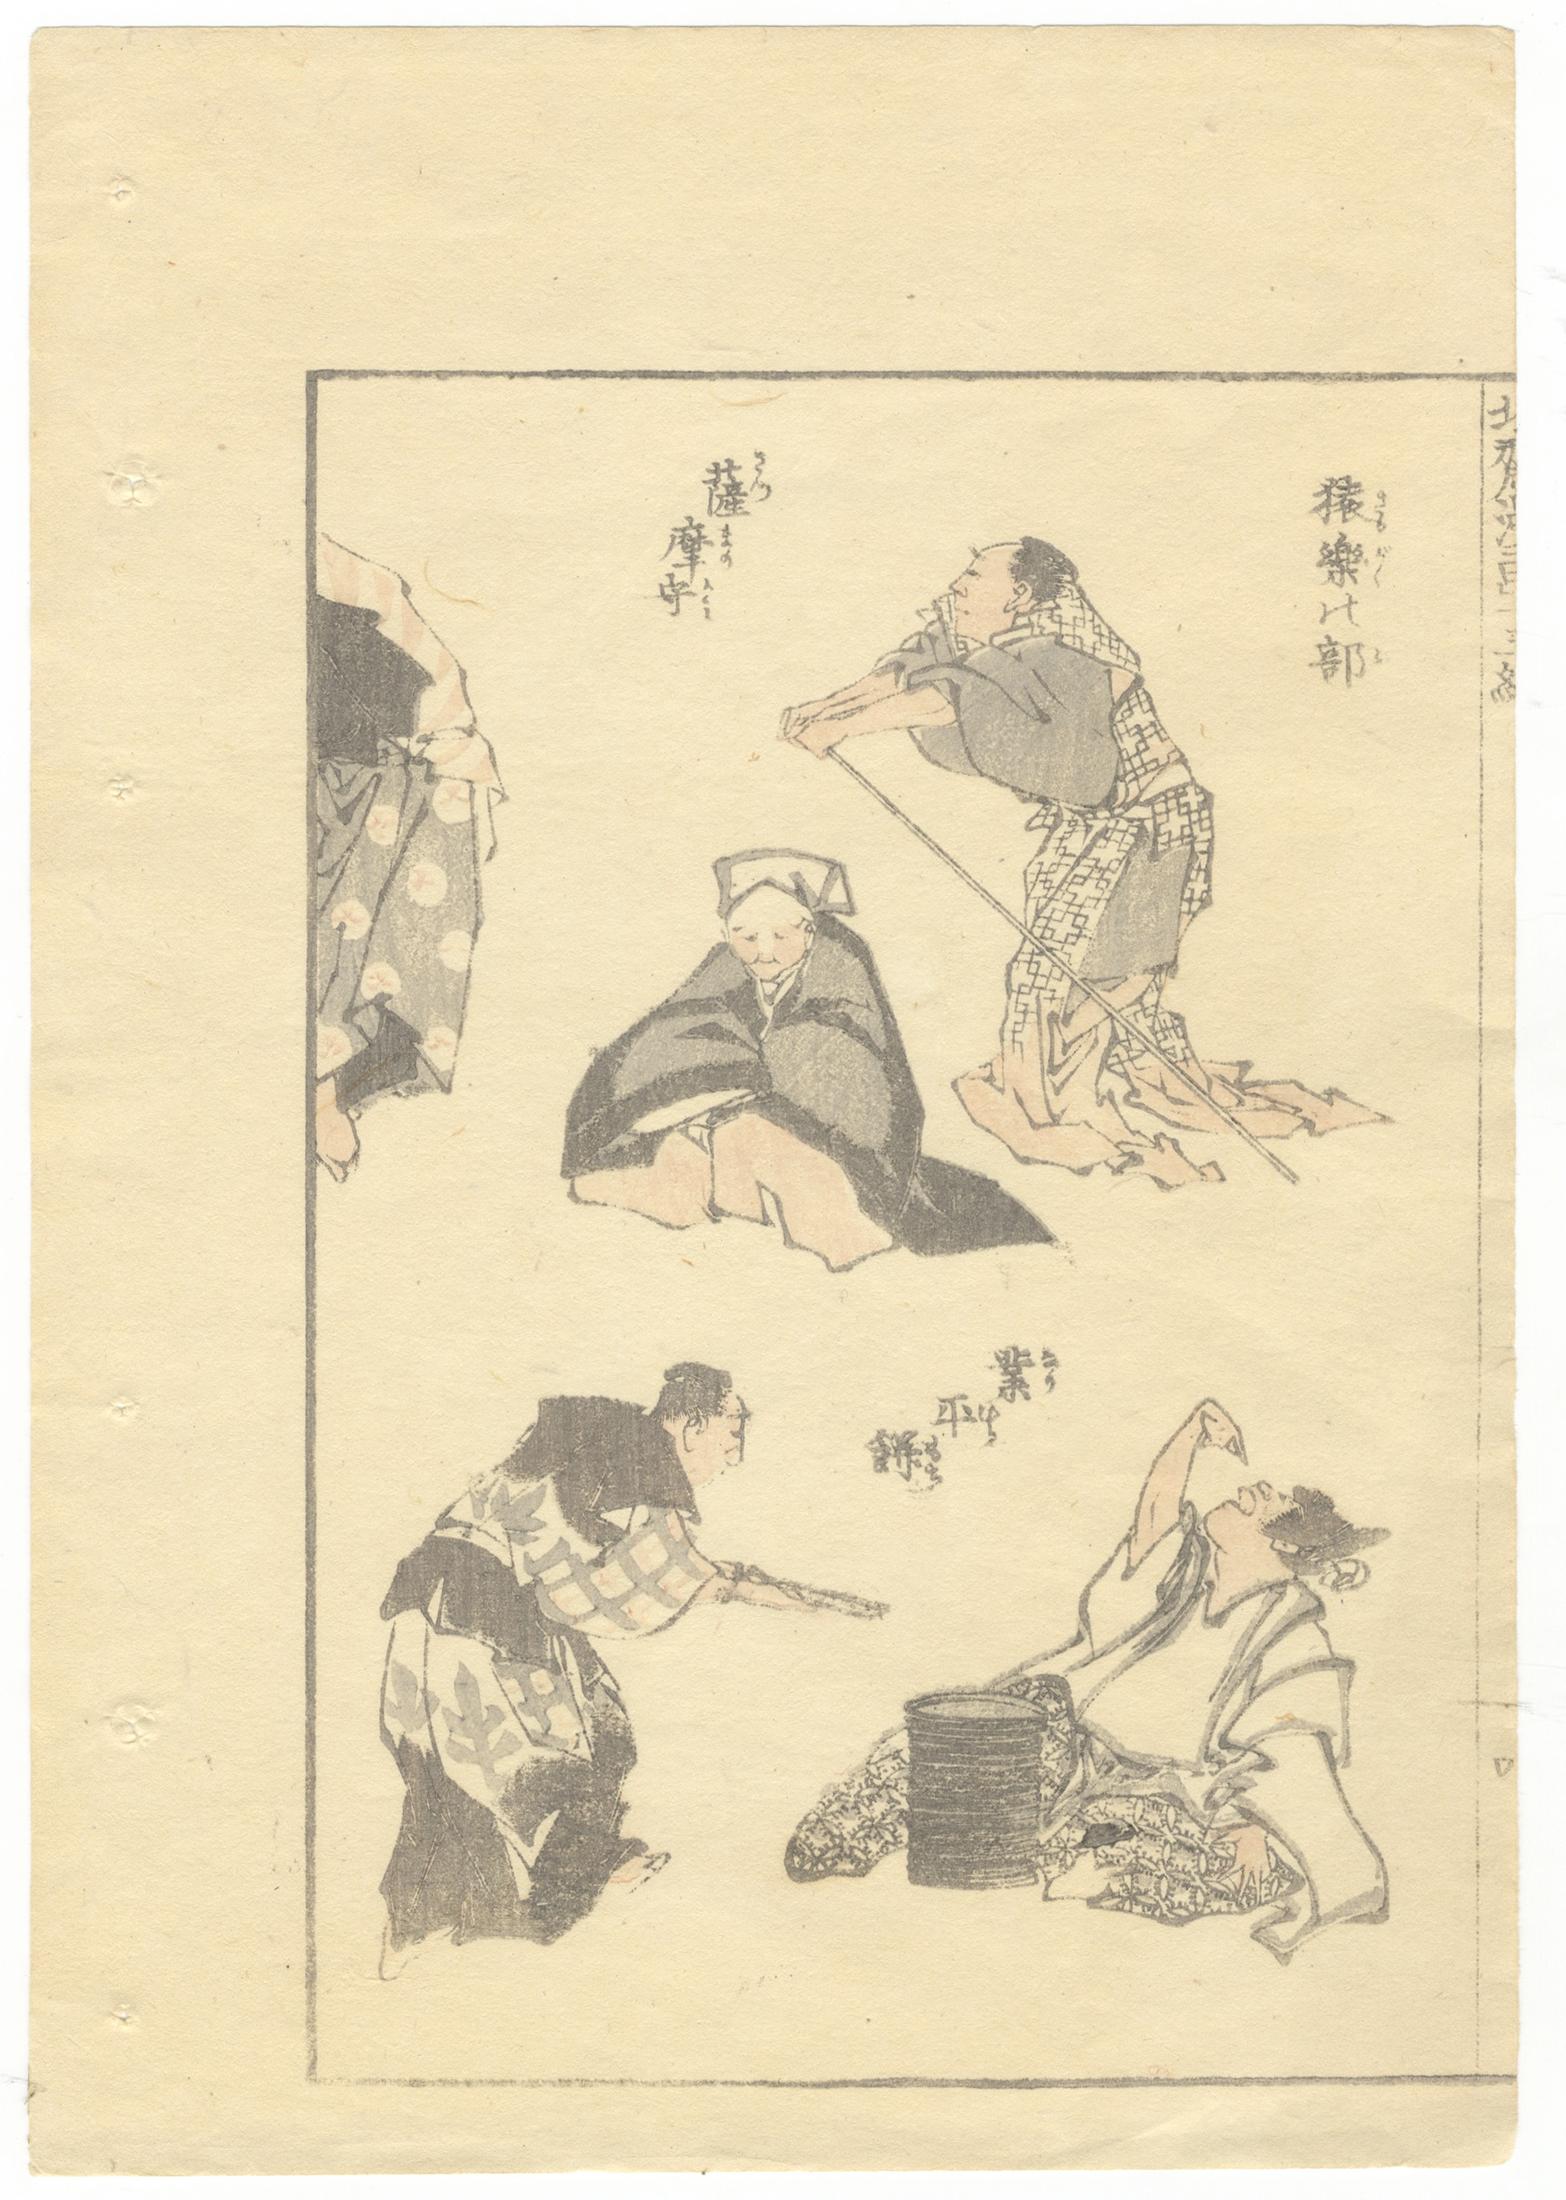 Artist: Katsushika Hokusai
Title: Sarugaku Theatre
Series: Hokusai Manga Volume 13
Publisher: Toheki-do
Published: 1814-1878
Size: 22.9 x 31.1 cm
Condition report: Binding holes. Thinning of paper in upper centre of right page.

This print is from